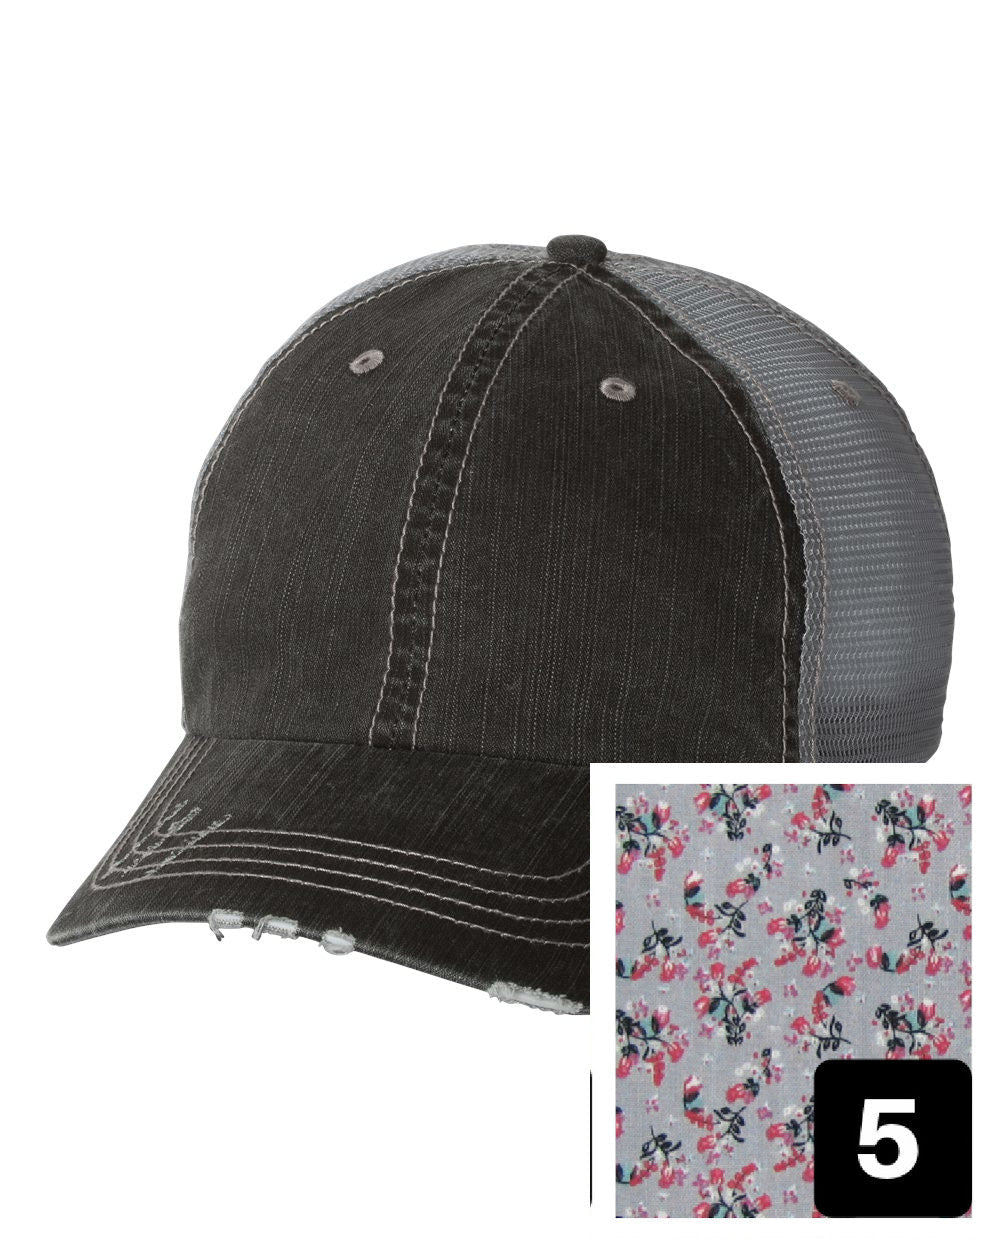 gray distressed trucker hat with purple and pink floral fabric state of Oklahoma